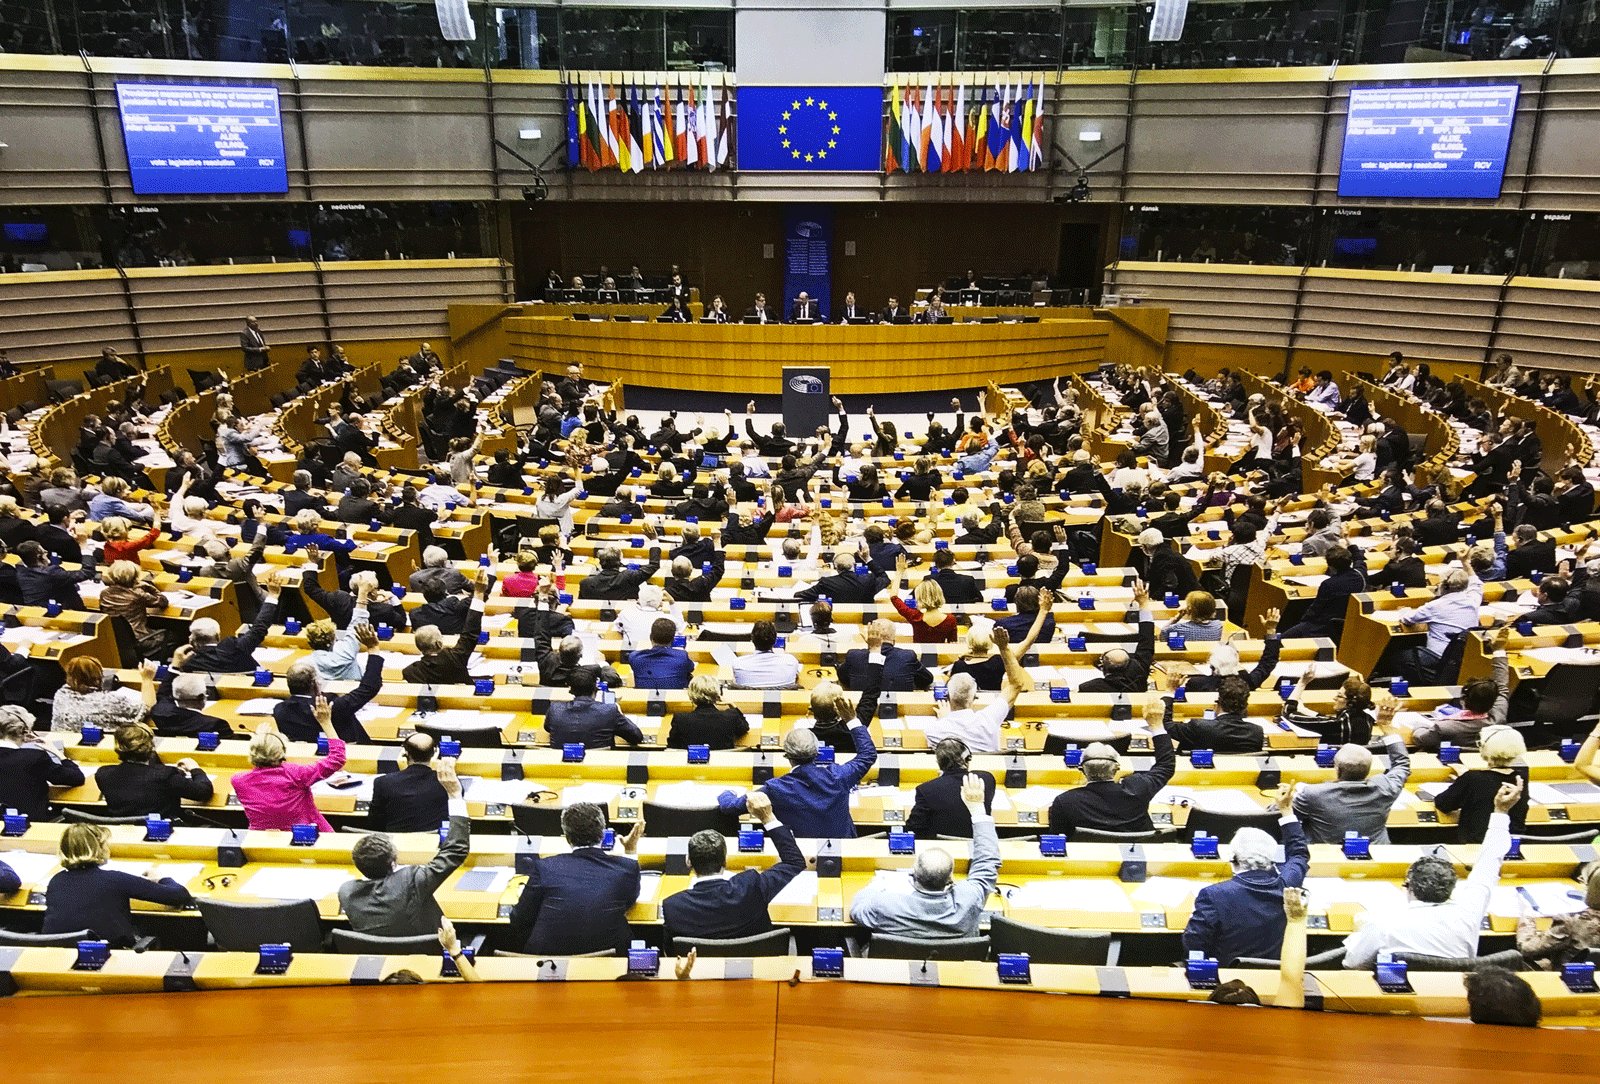 How to attend session of the European Parliament in Brussels